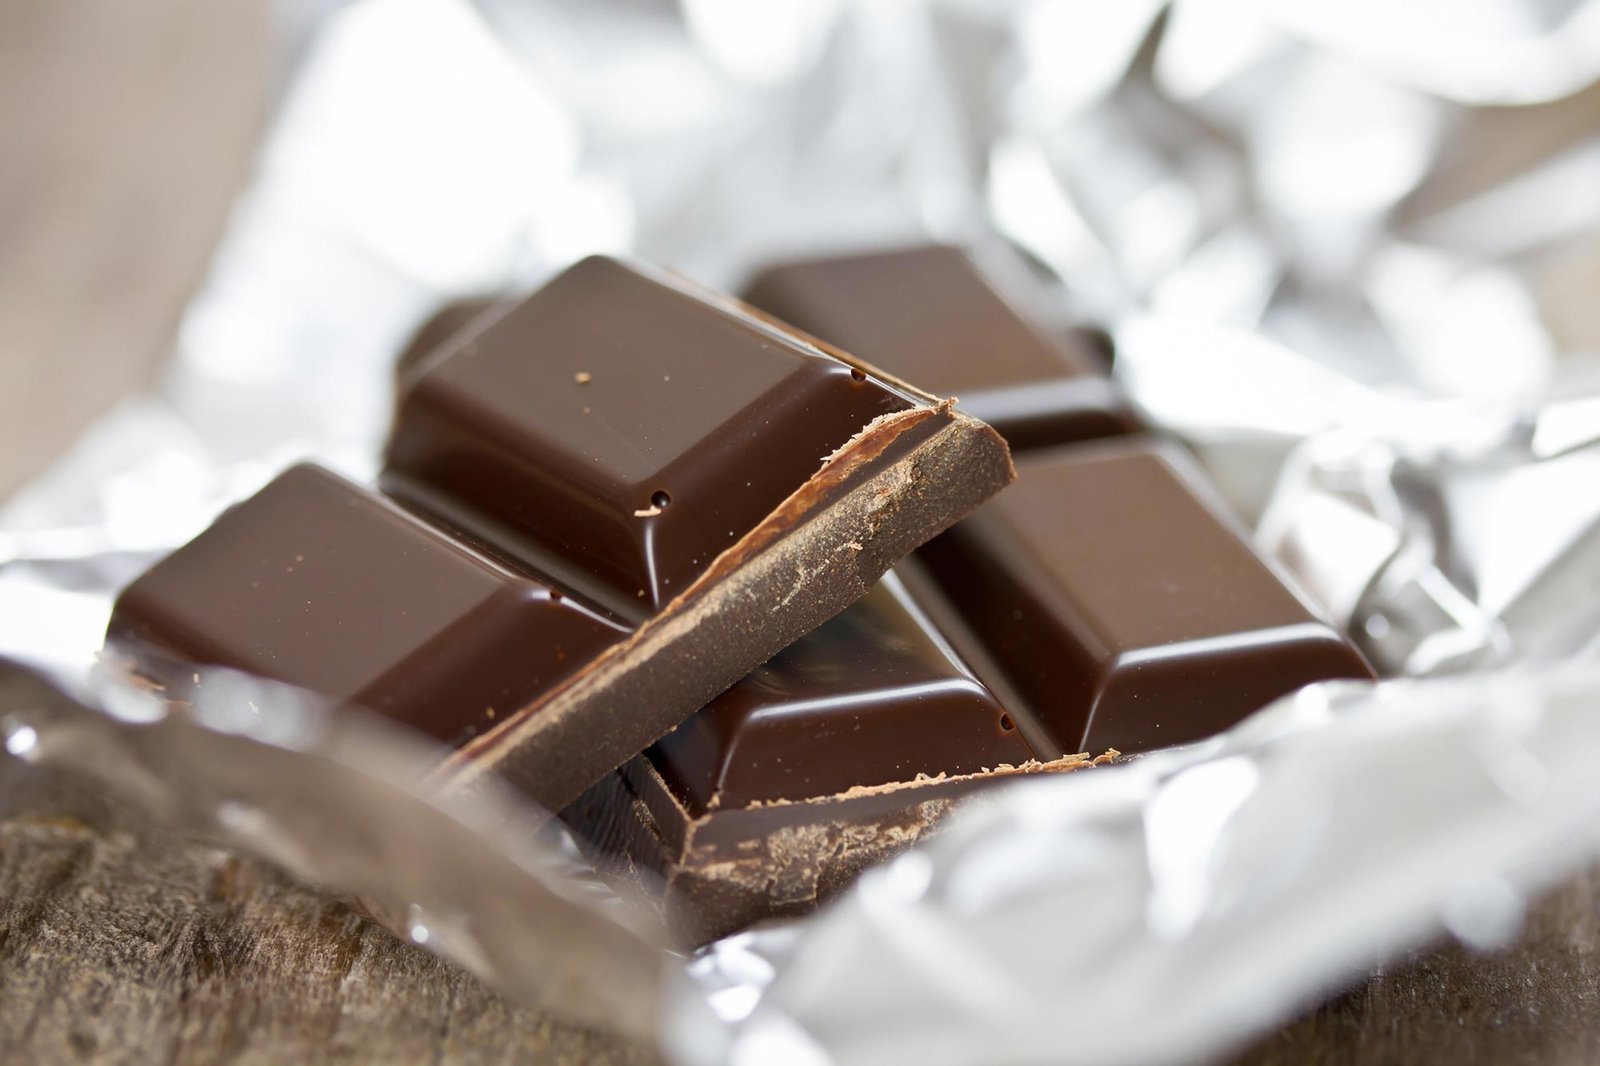 Hazards in Your Chocolate? New Study Reveals Potential Risks